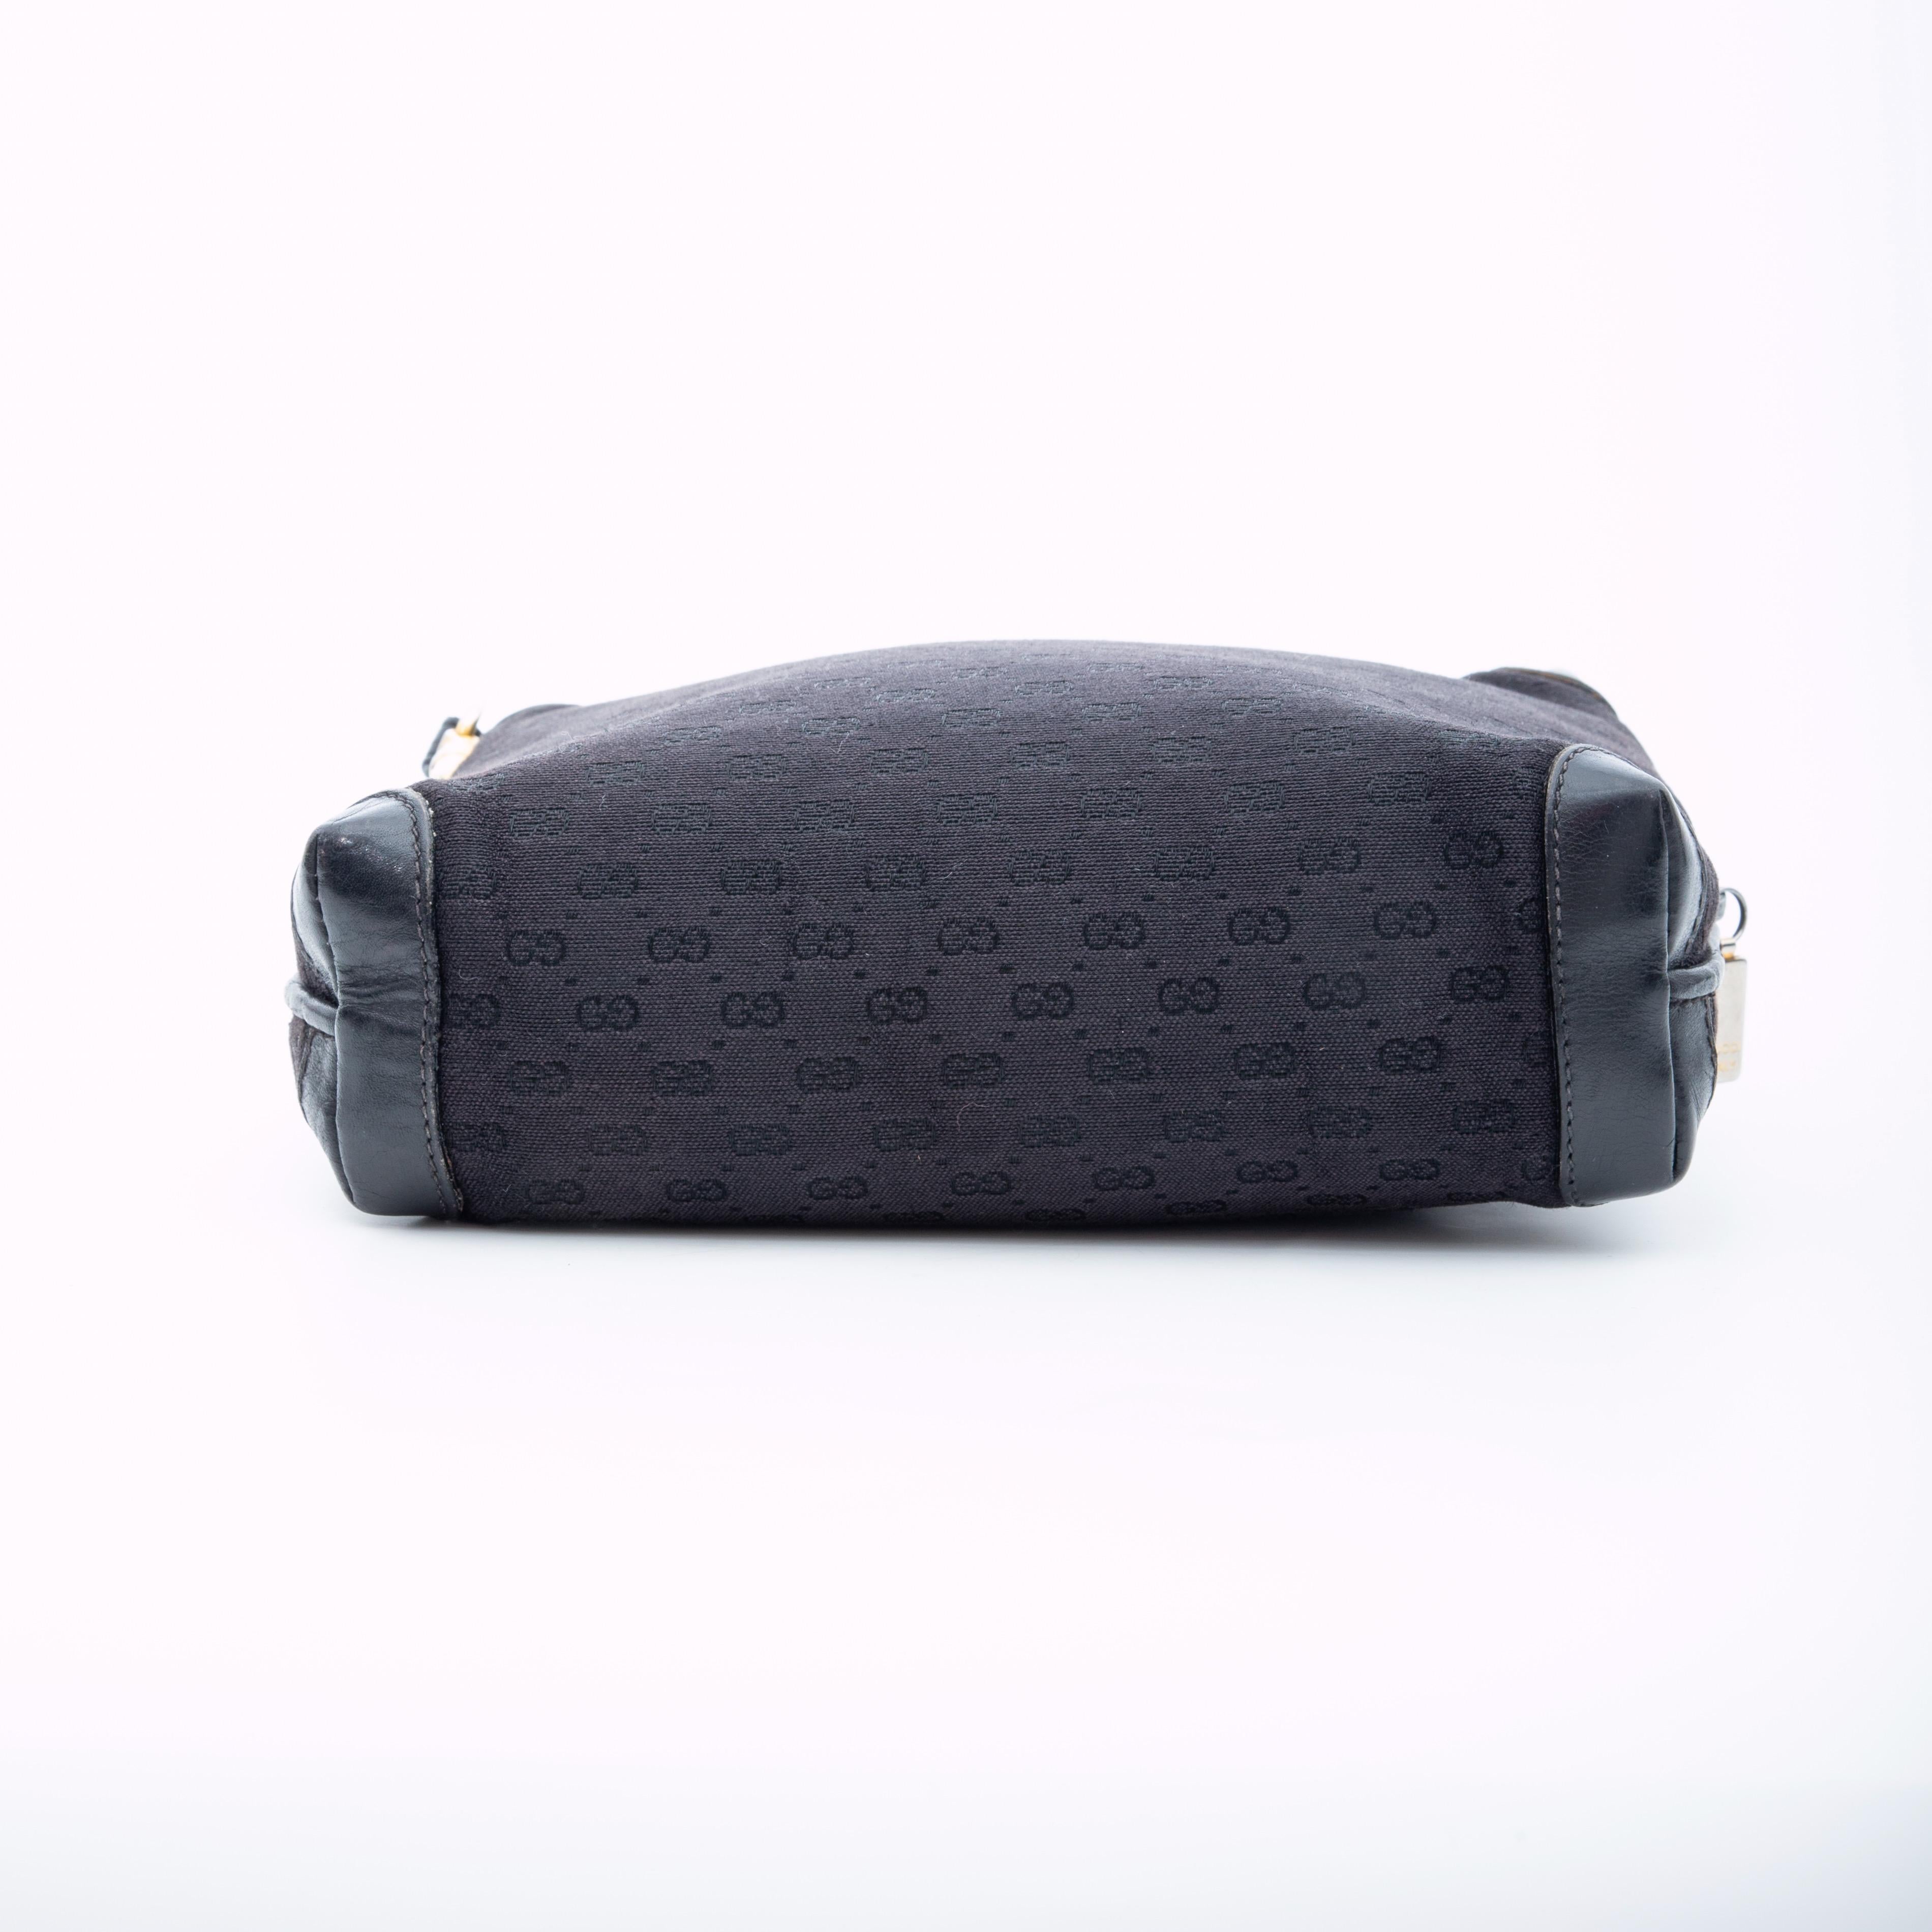 COLOR: Black
MATERIAL: Cloth
ITEM CODE: 07-37-4916
MEASURES: H 7” x L 8” x D 2.5”
DROP: 21”
COMES WITH: Dust bag
CONDITION: Good - discolouration to interior. No stickiness, but some pealing. Leather shoulder strap has been replaced. 

Made in Italy